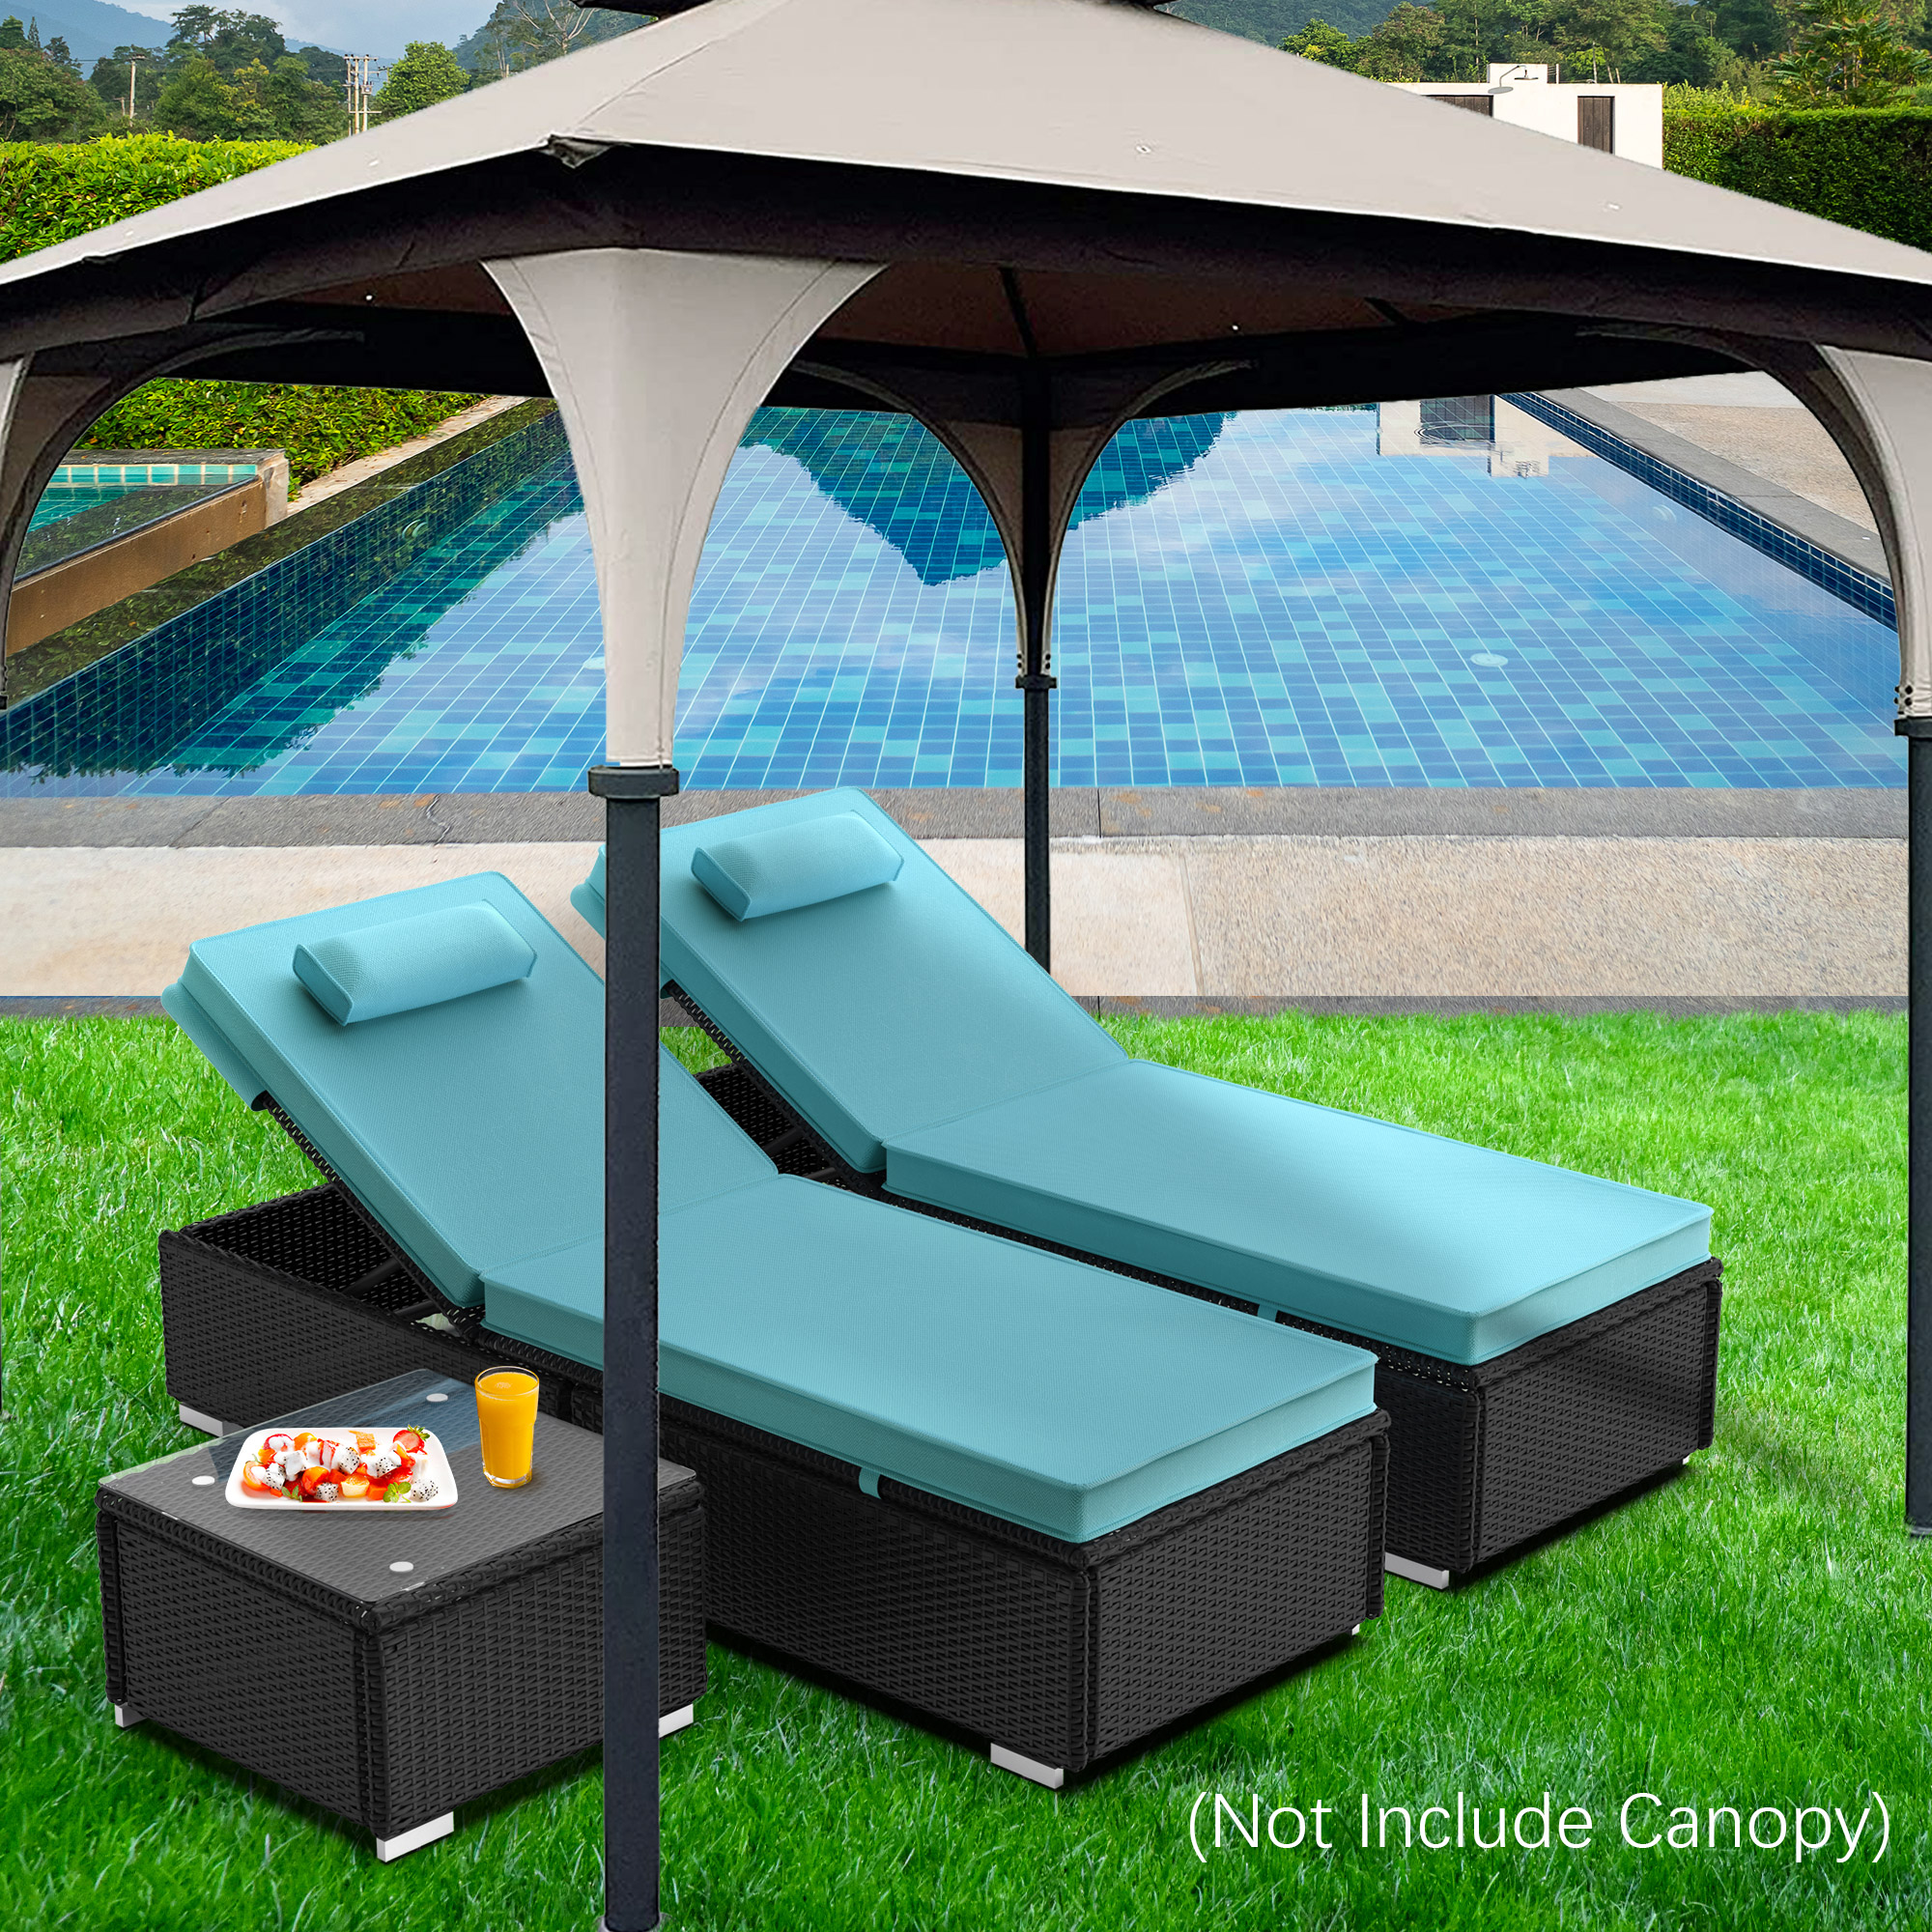 3 Pieces 5 Position Outdoor PE Rattan Patio Lounge Set, Folding Reclining Chaise Chairs with 2 Pillows & Coffee Table, Wicker Chaise Furniture Sets for Porch Poolside Backyard Garden, S1546 - image 3 of 12